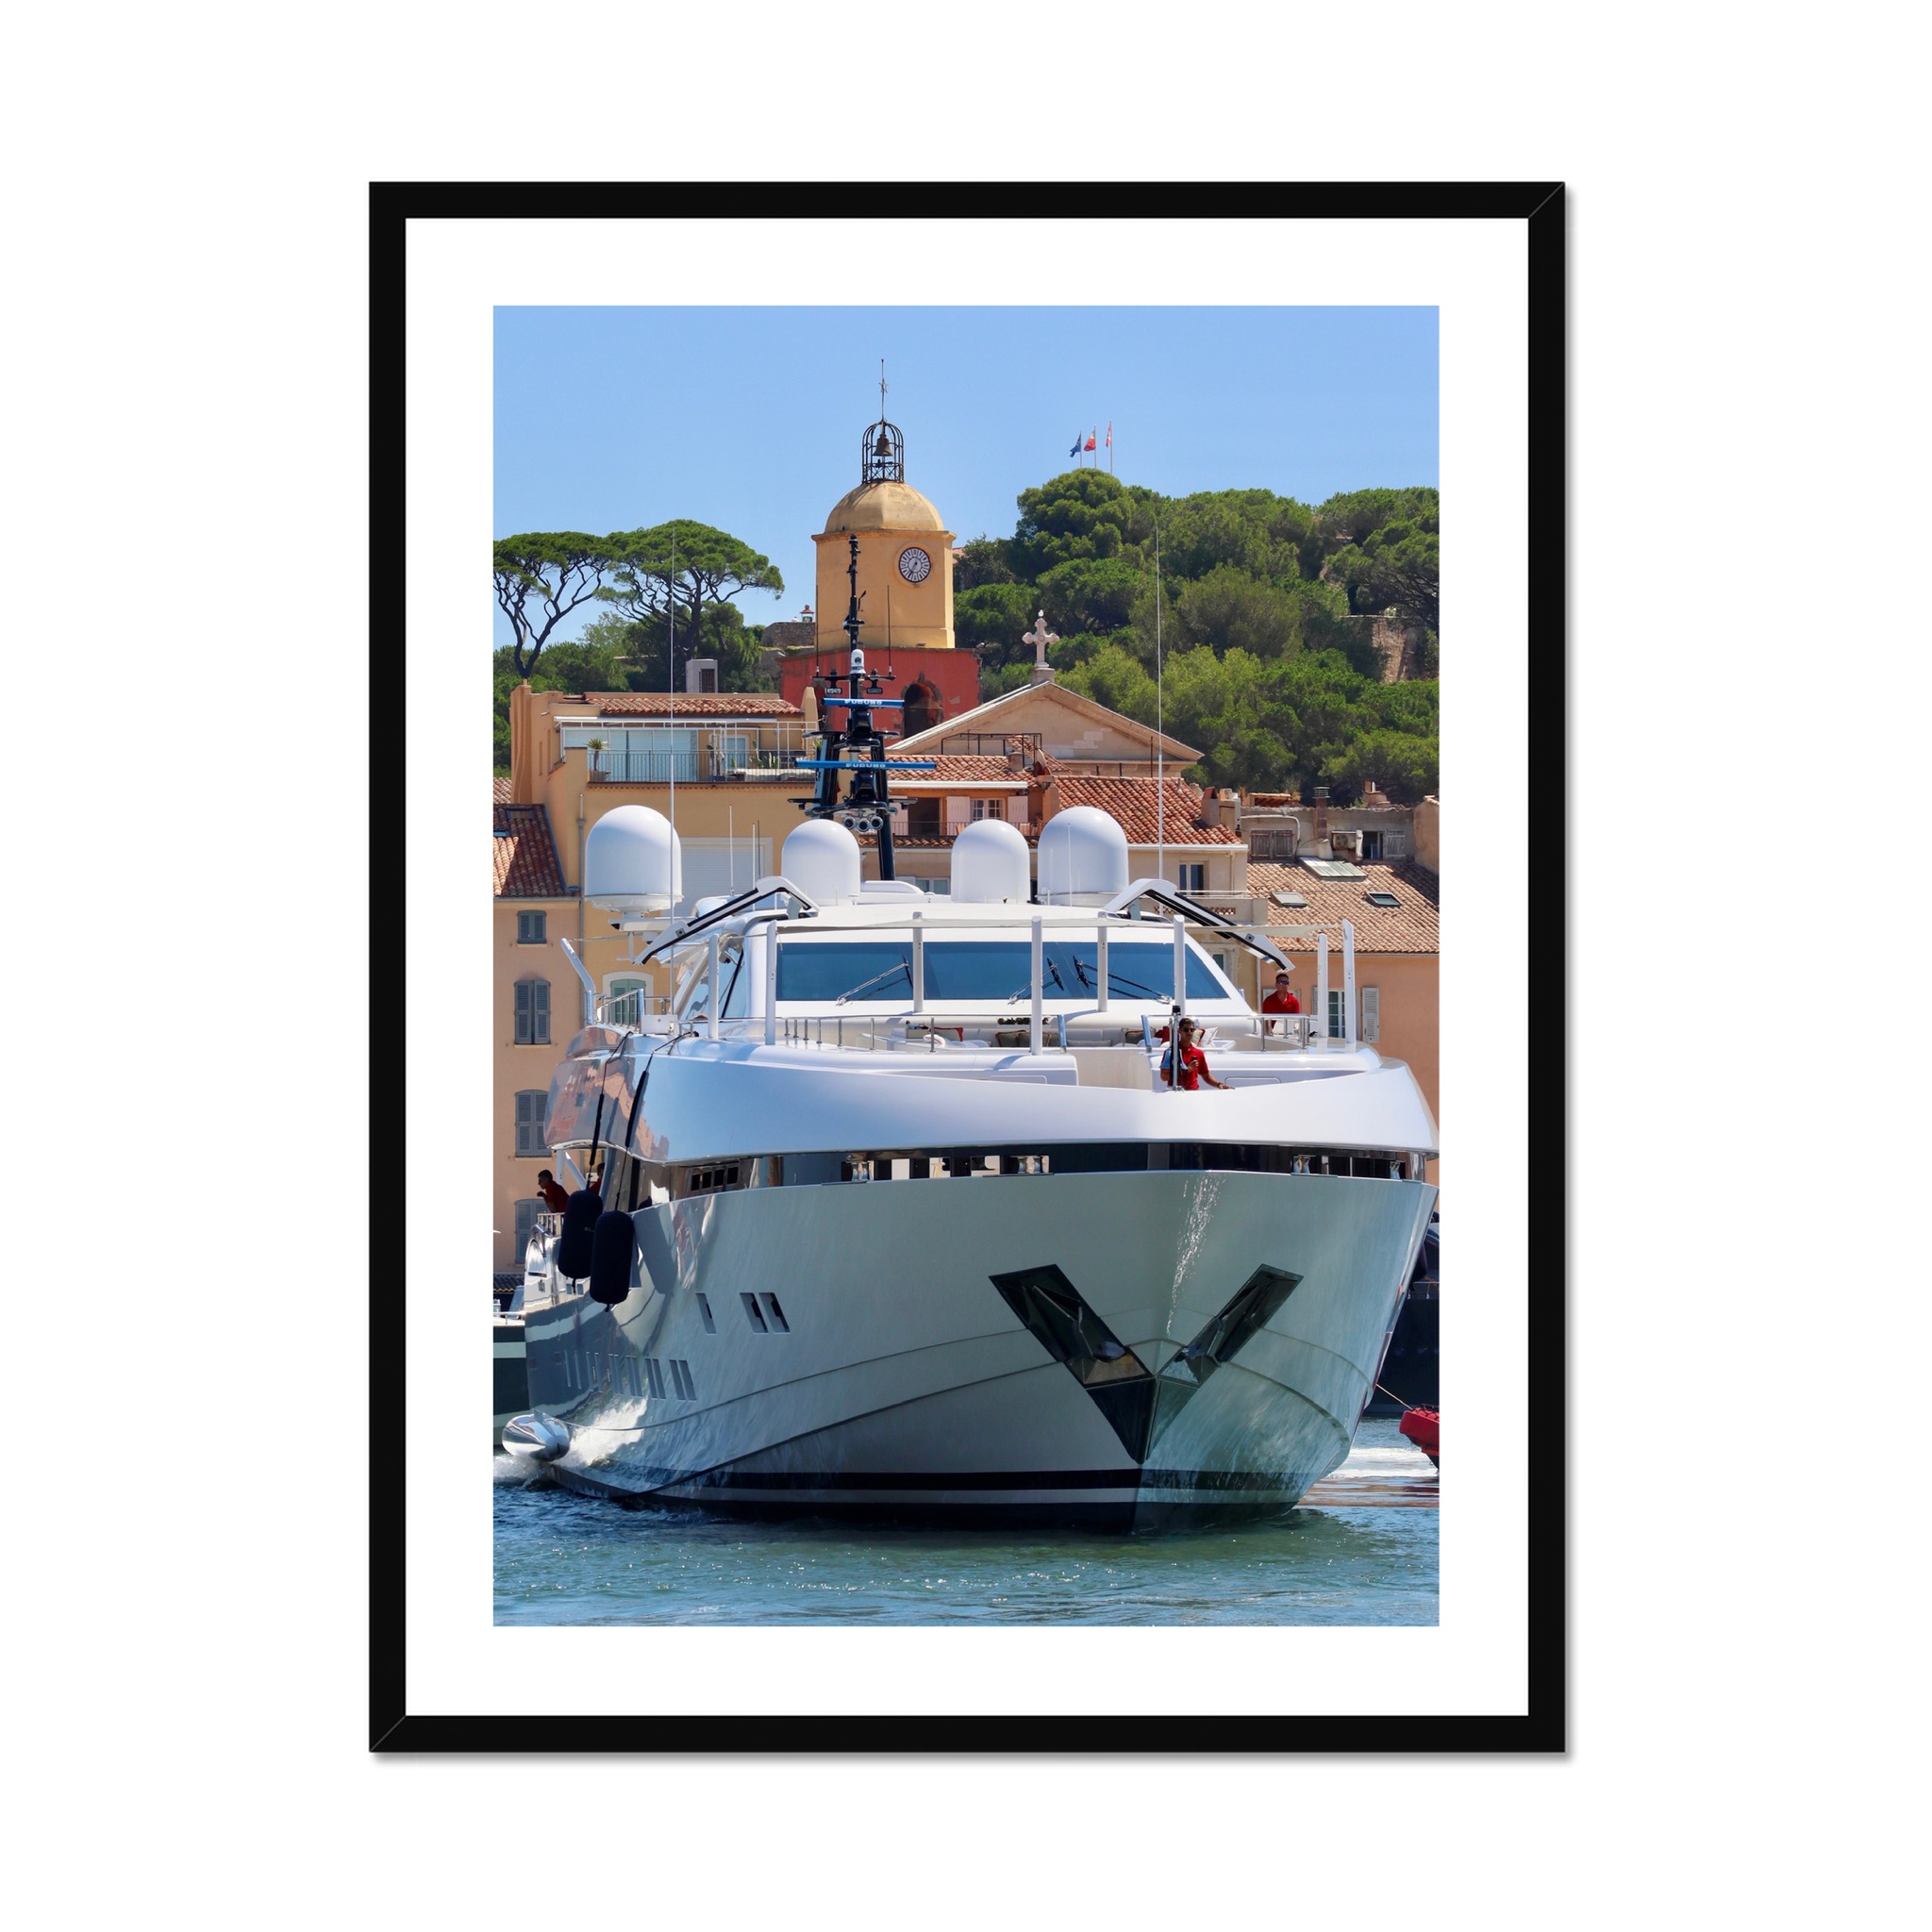 South of France Photos framed print - Saint Tropez bell tower with superyacht